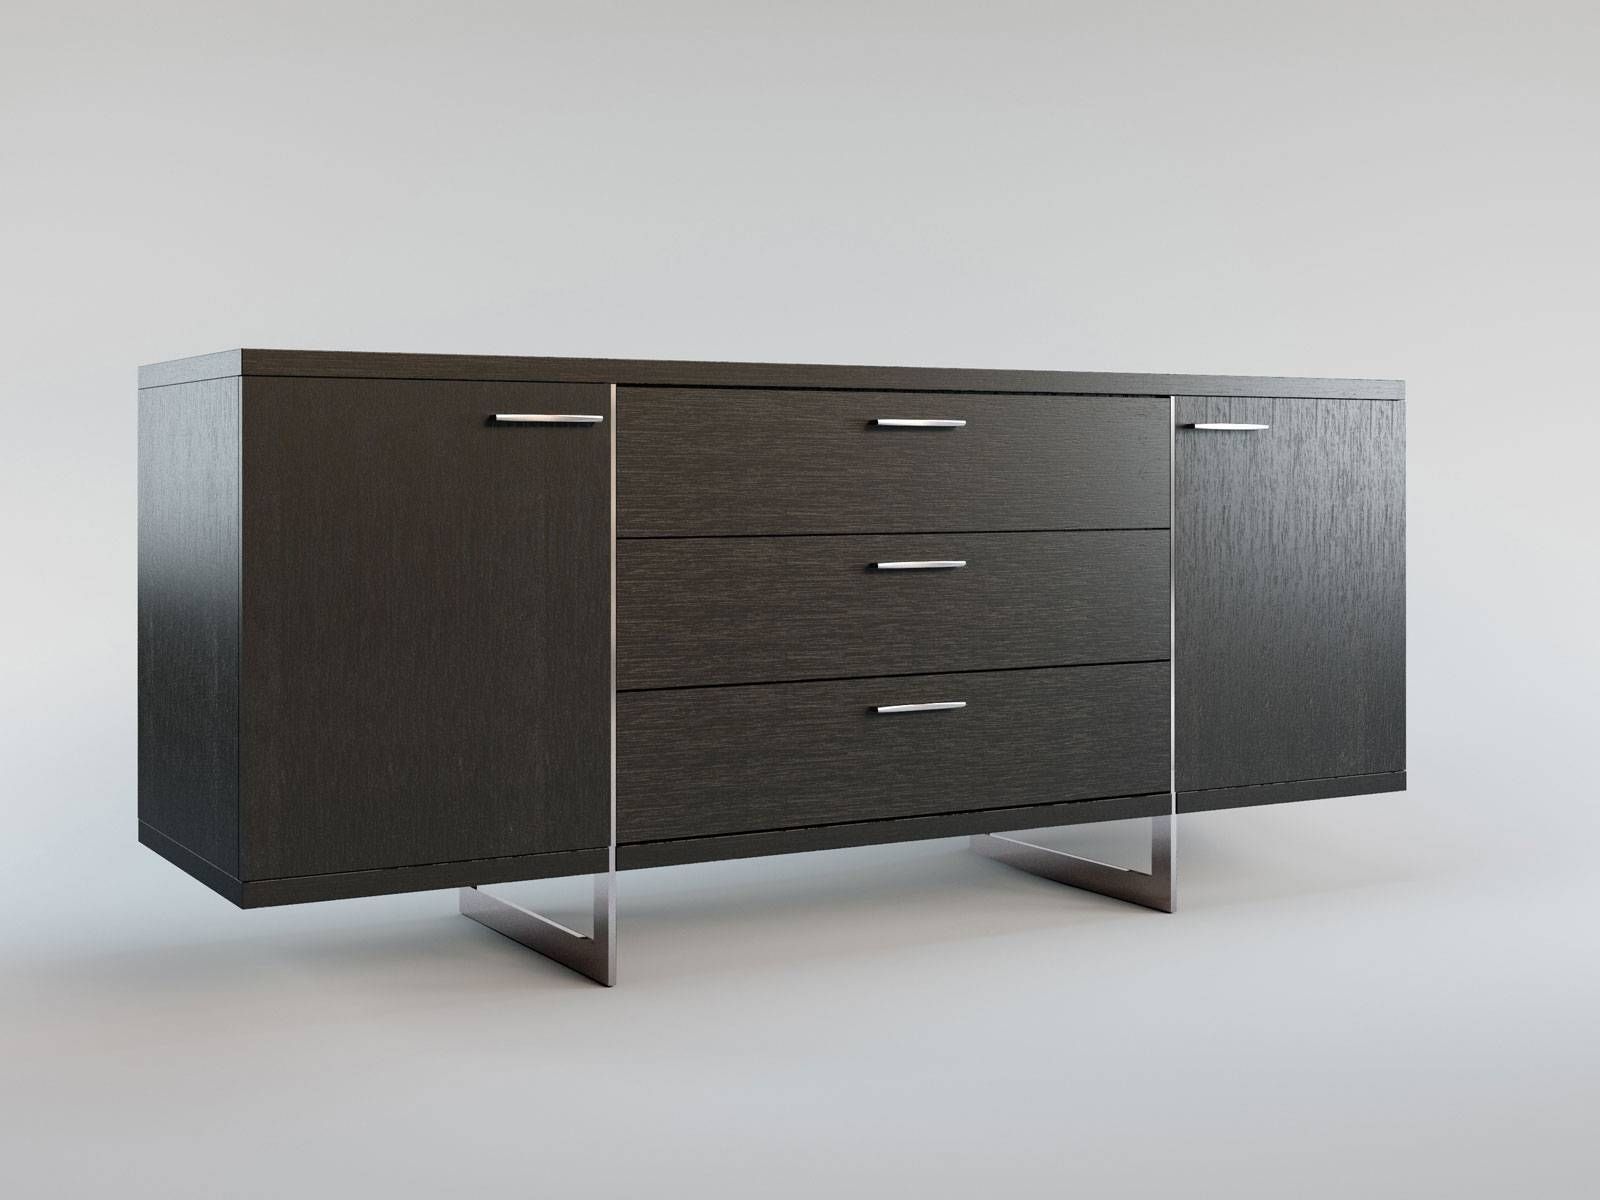 Contemporary Sideboard Buffet With Three Storage Drawers Tulsa In Contemporary Sideboard (View 8 of 20)